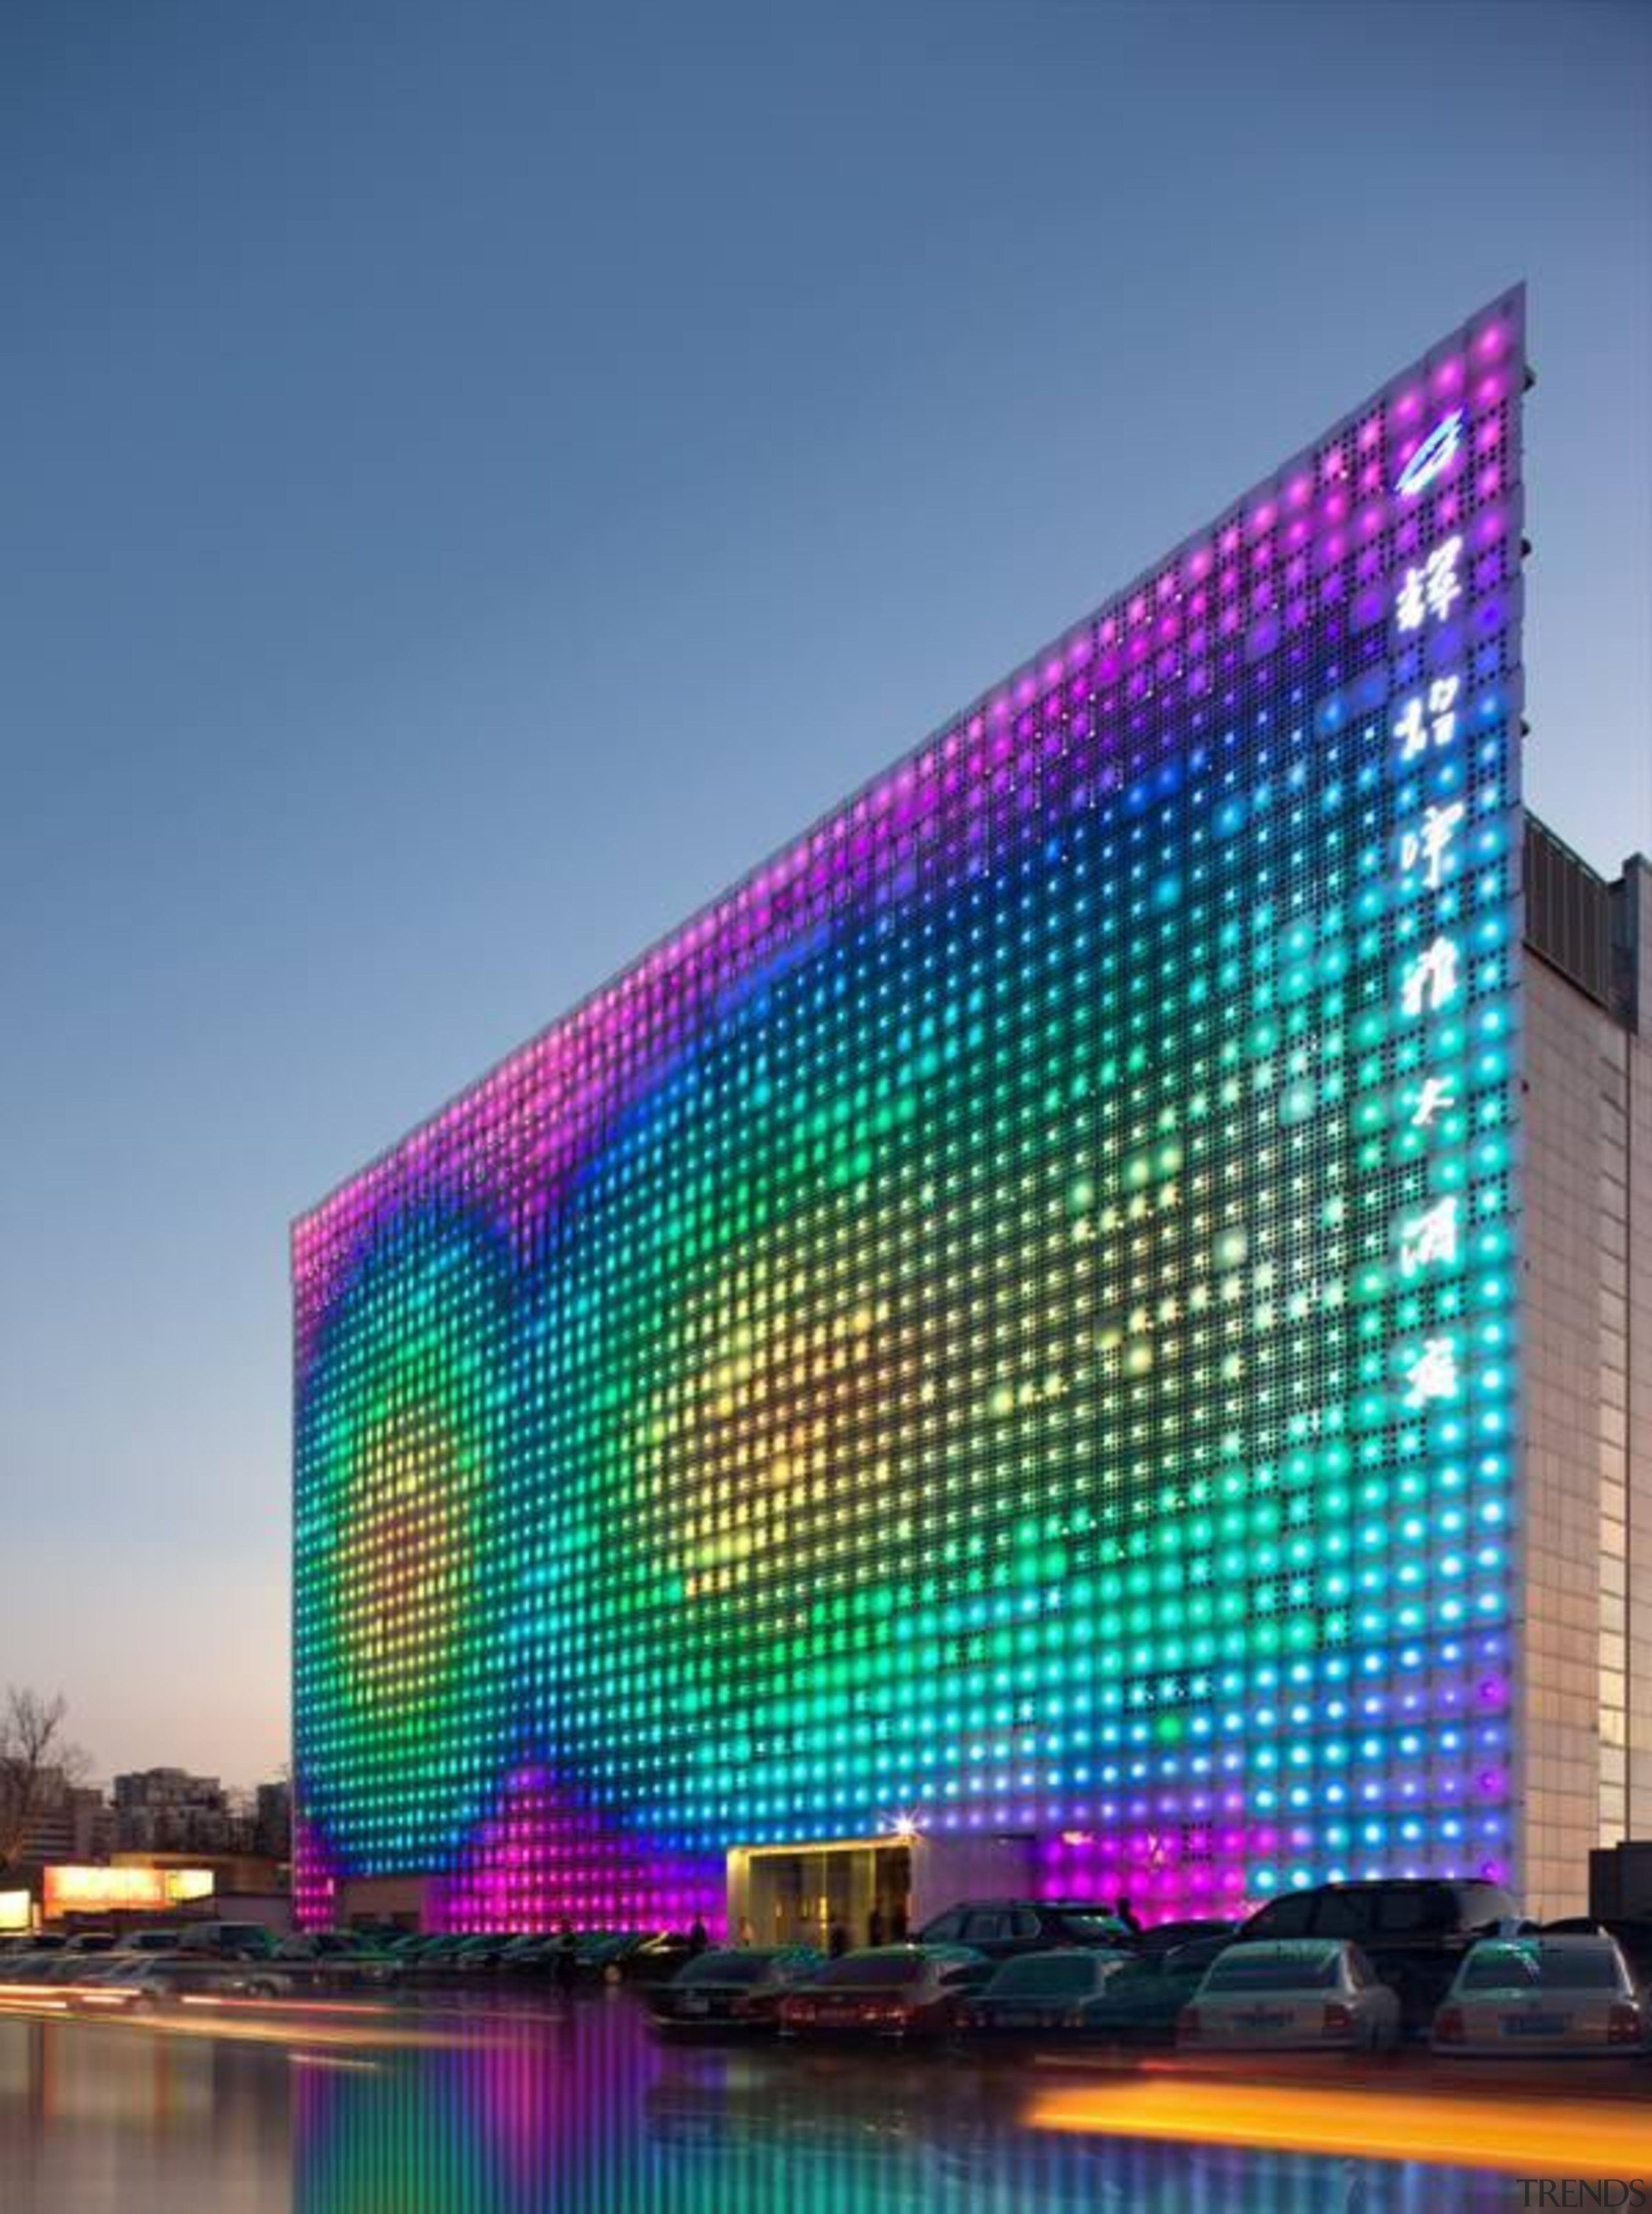 Designed by SGP Architects the GreenPix Zero Energy architecture, building, corporate headquarters, display device, facade, headquarters, led display, light, lighting, metropolis, purple, sky, structure, technology, teal, blue